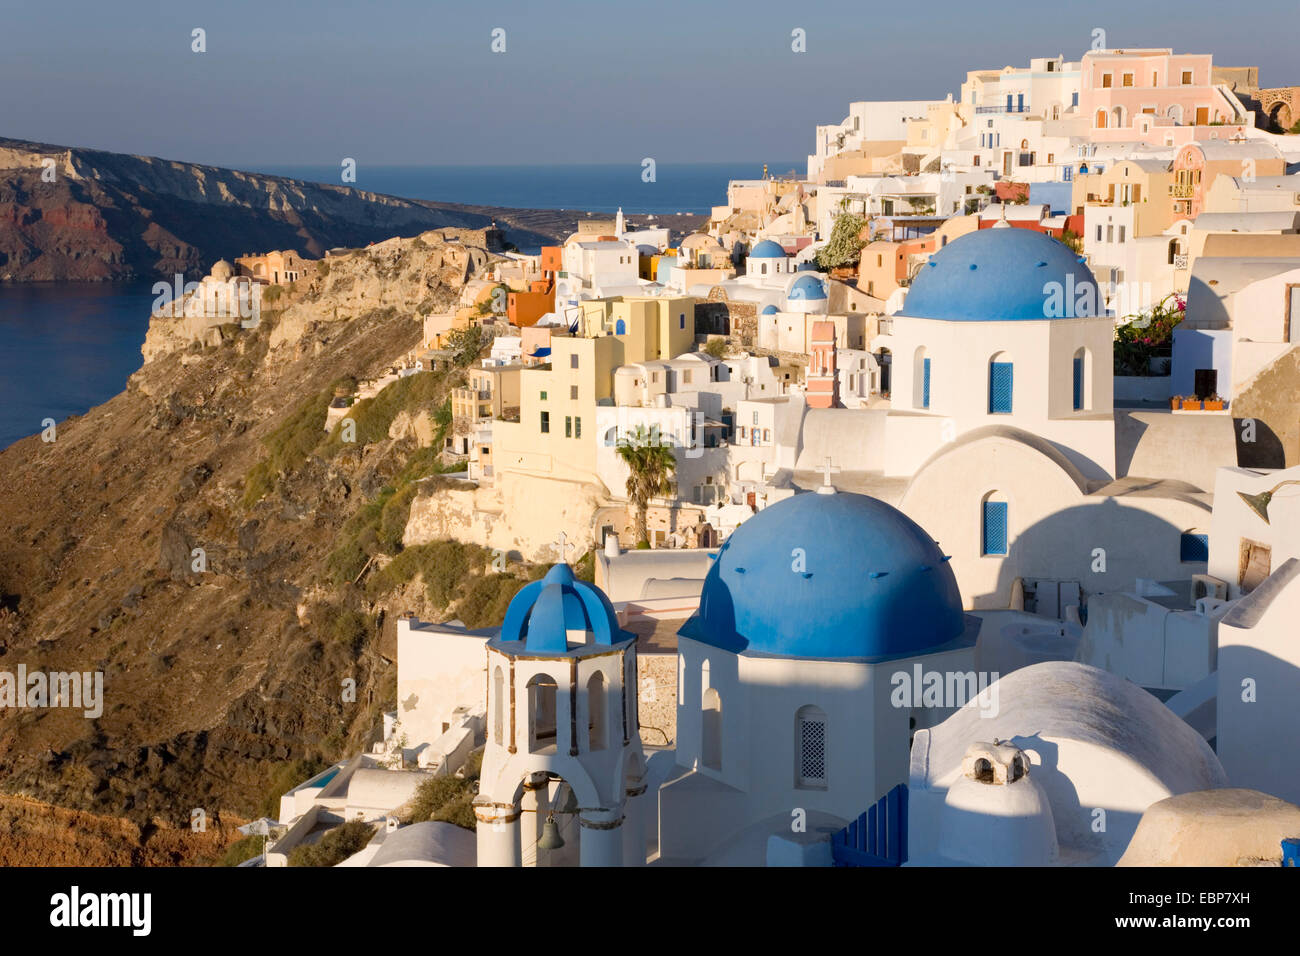 Ia, Santorini, South Aegean, Greece. The village at sunrise, typical blue-domed churches prominent. Stock Photo